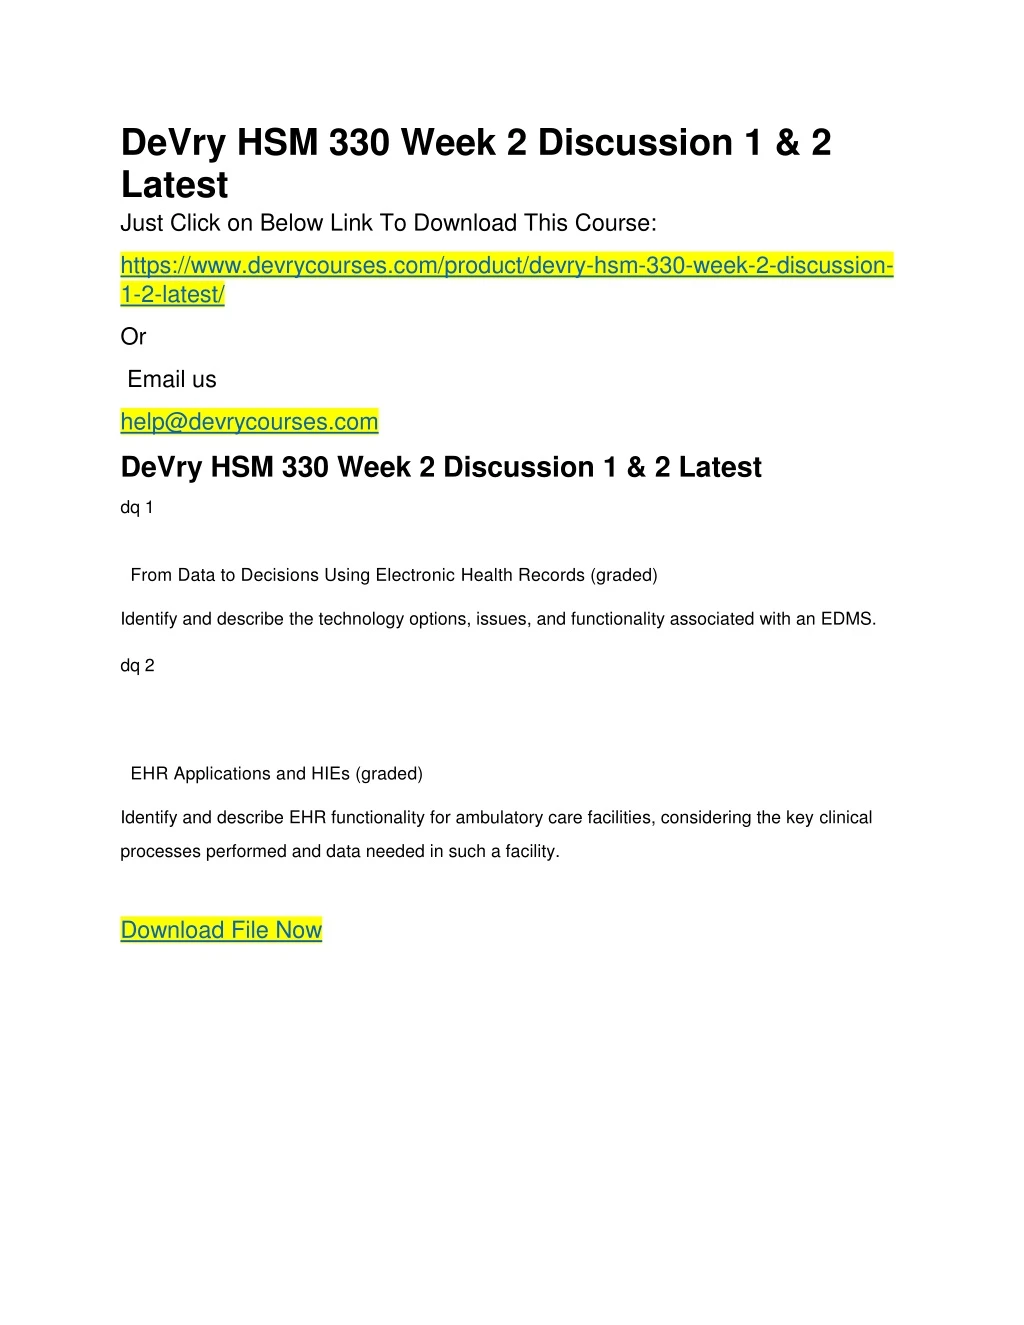 devry hsm 330 week 2 discussion 1 2 latest just